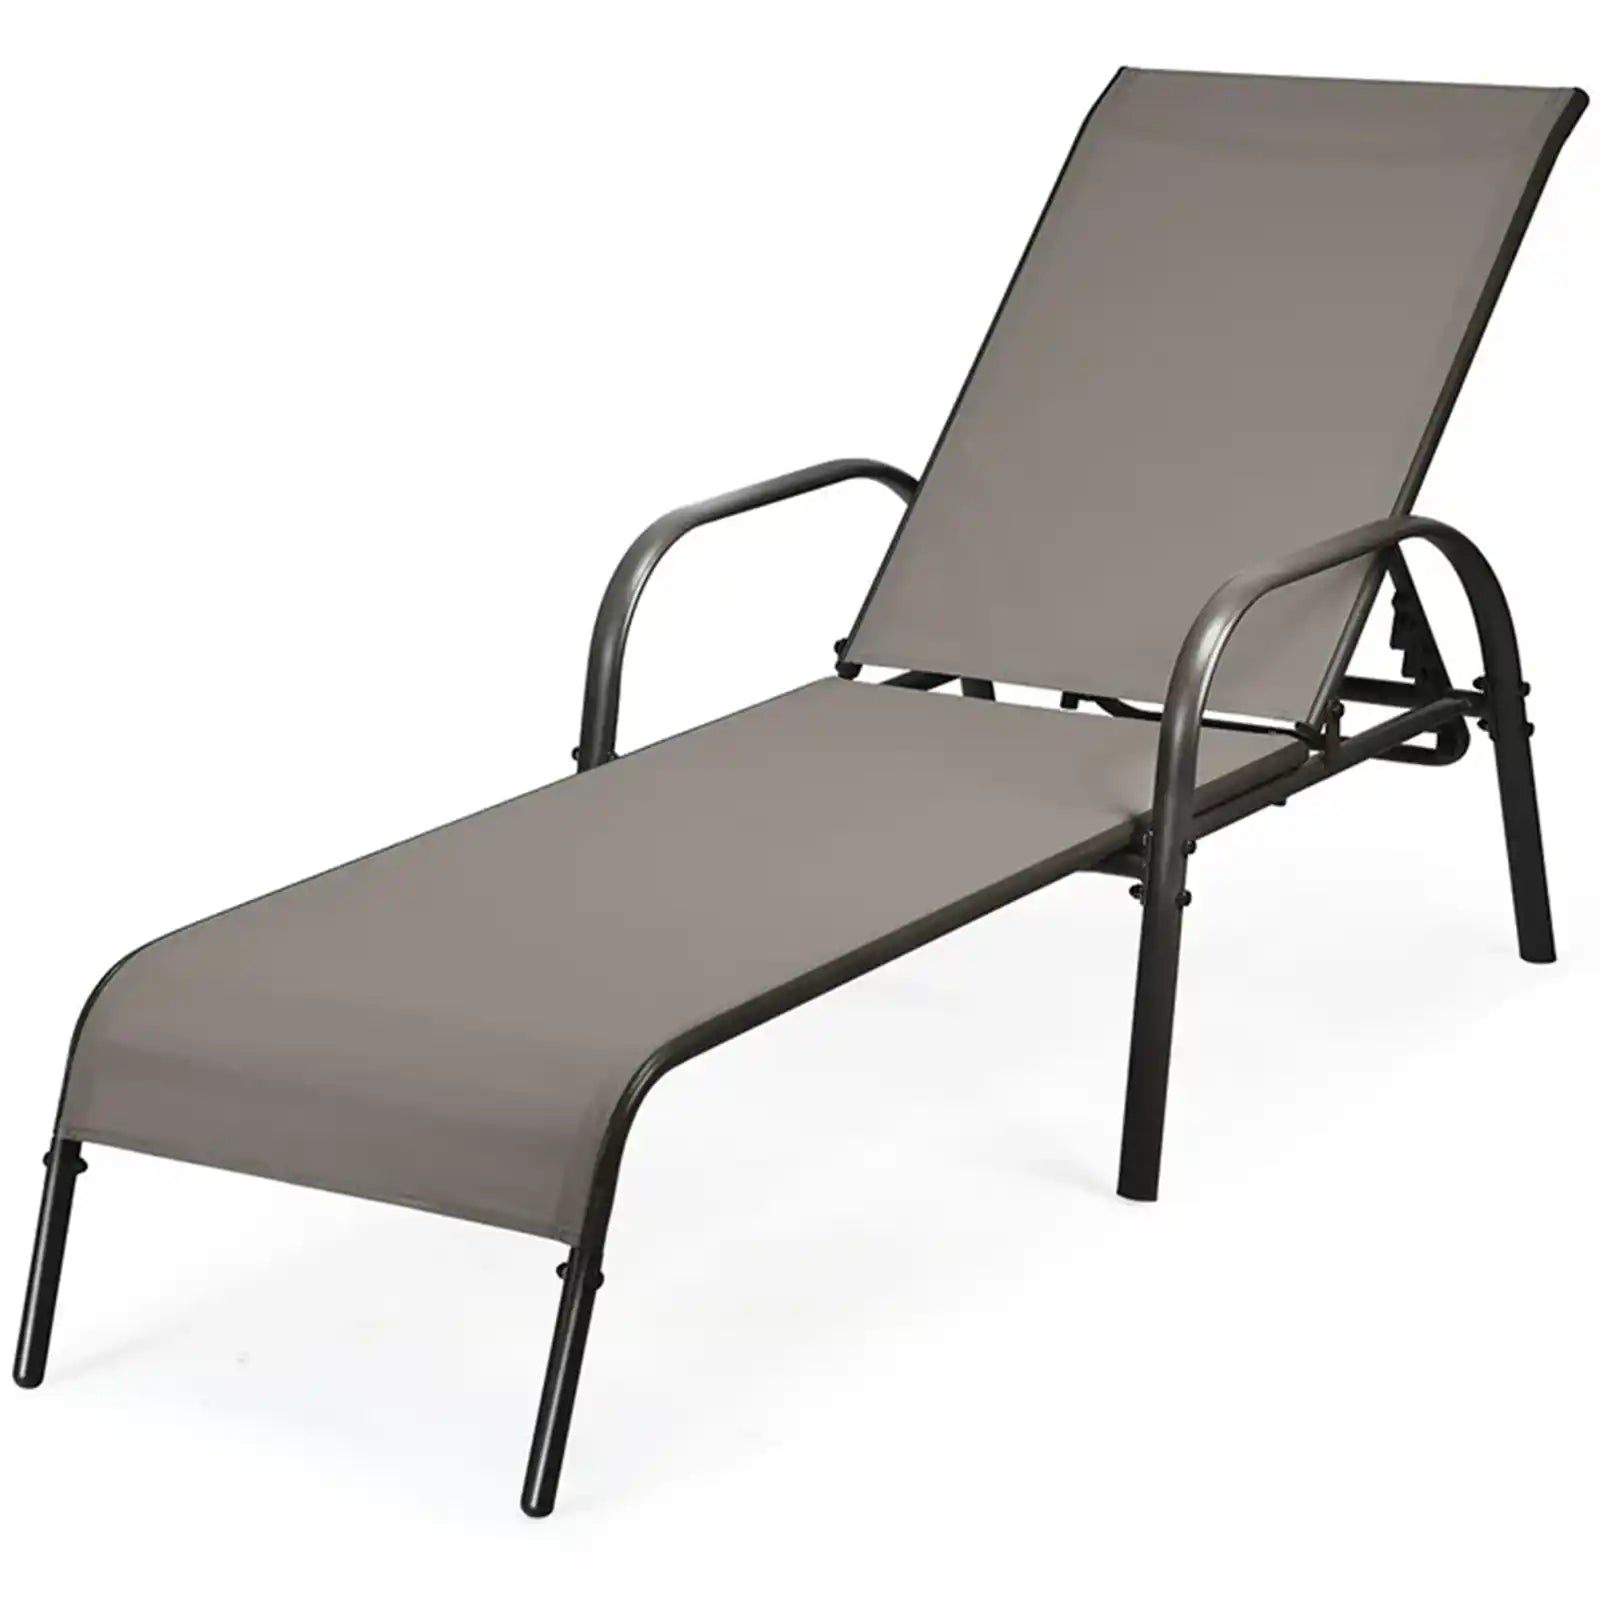 Outdoor Patio Lounge Chair Chaise Fabric Adjustable Reclining Armrest Pool